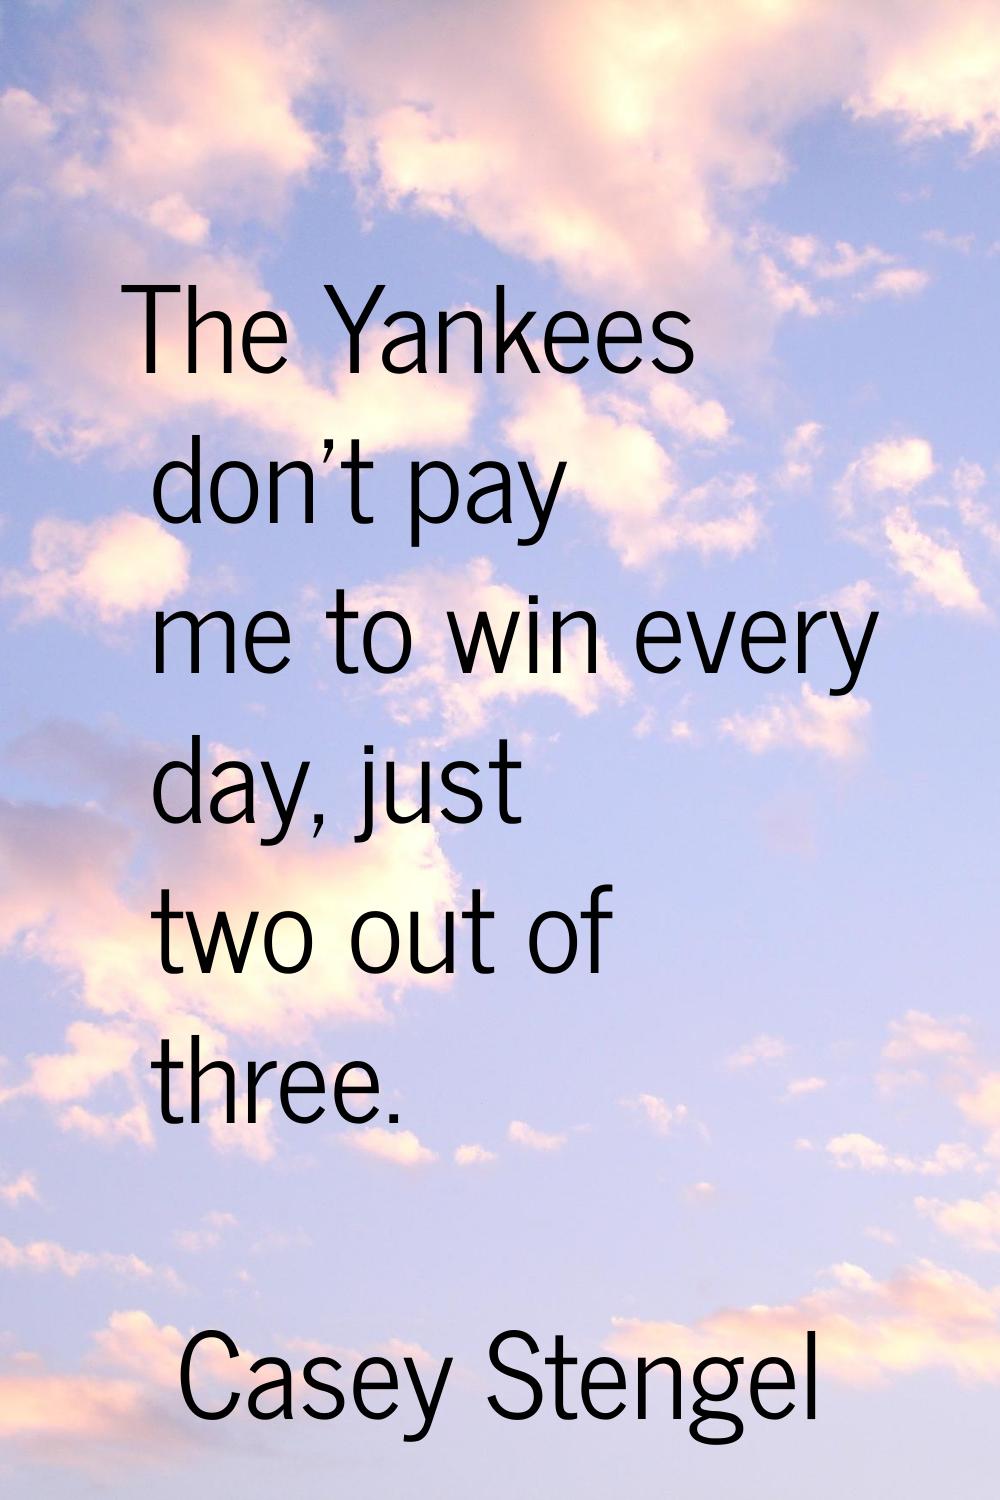 The Yankees don't pay me to win every day, just two out of three.